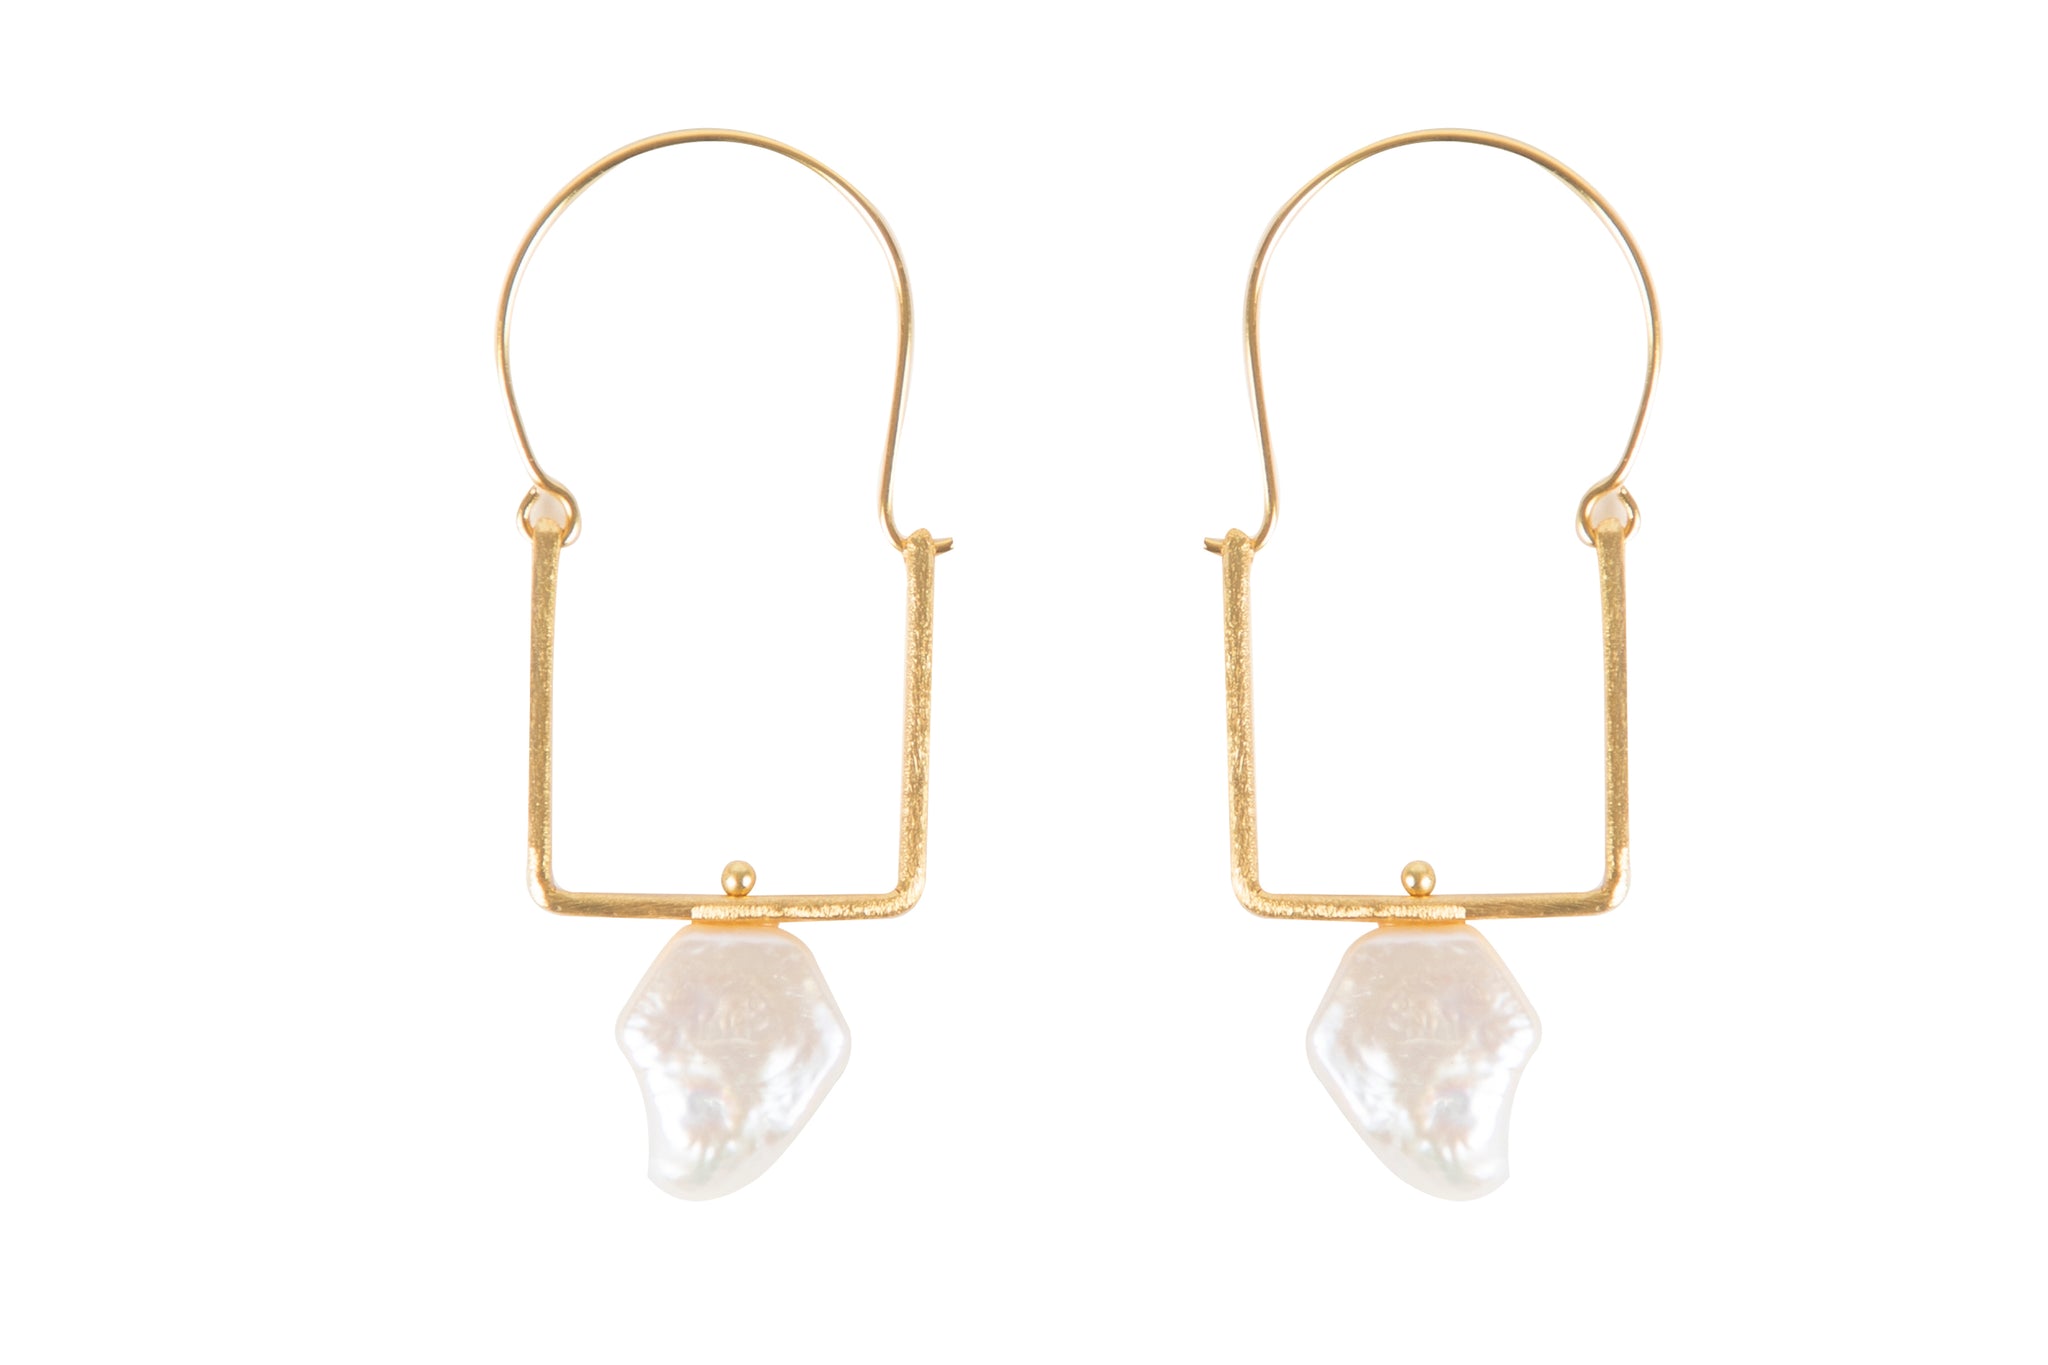 Square Hoops with Baroque Pearl, Gold tone. Handmade